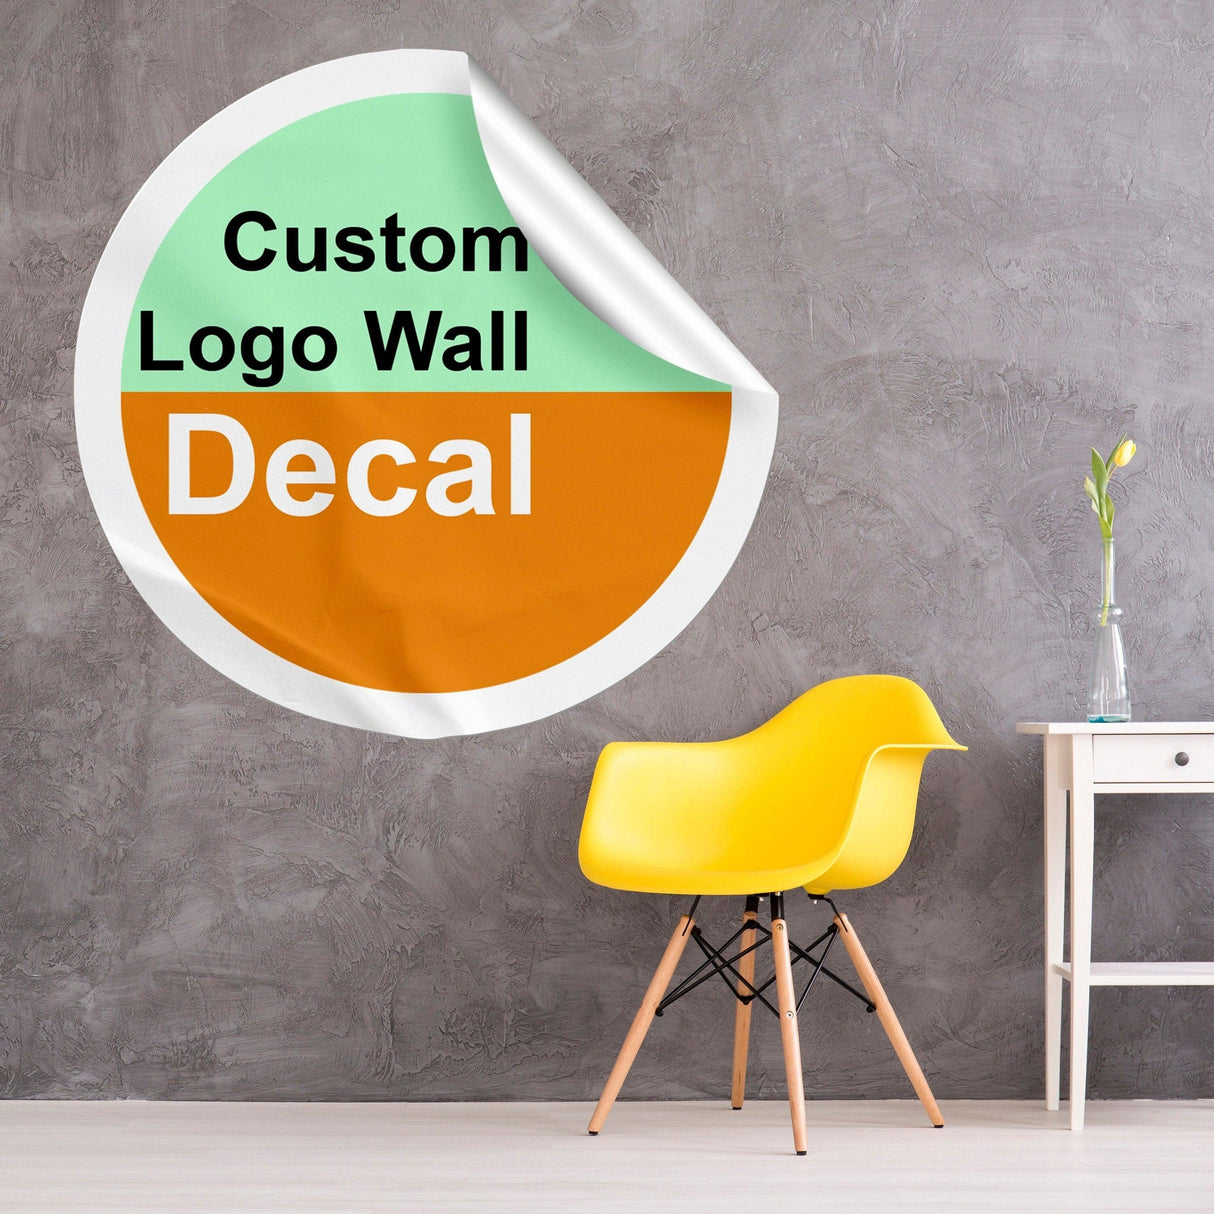 Custom Wall Decal Sticker Print - Personalized Vinyl Label Printed Shape Cut Decal - Business Repeat Customs Photo Eco Sign Ecofriendly - Decords